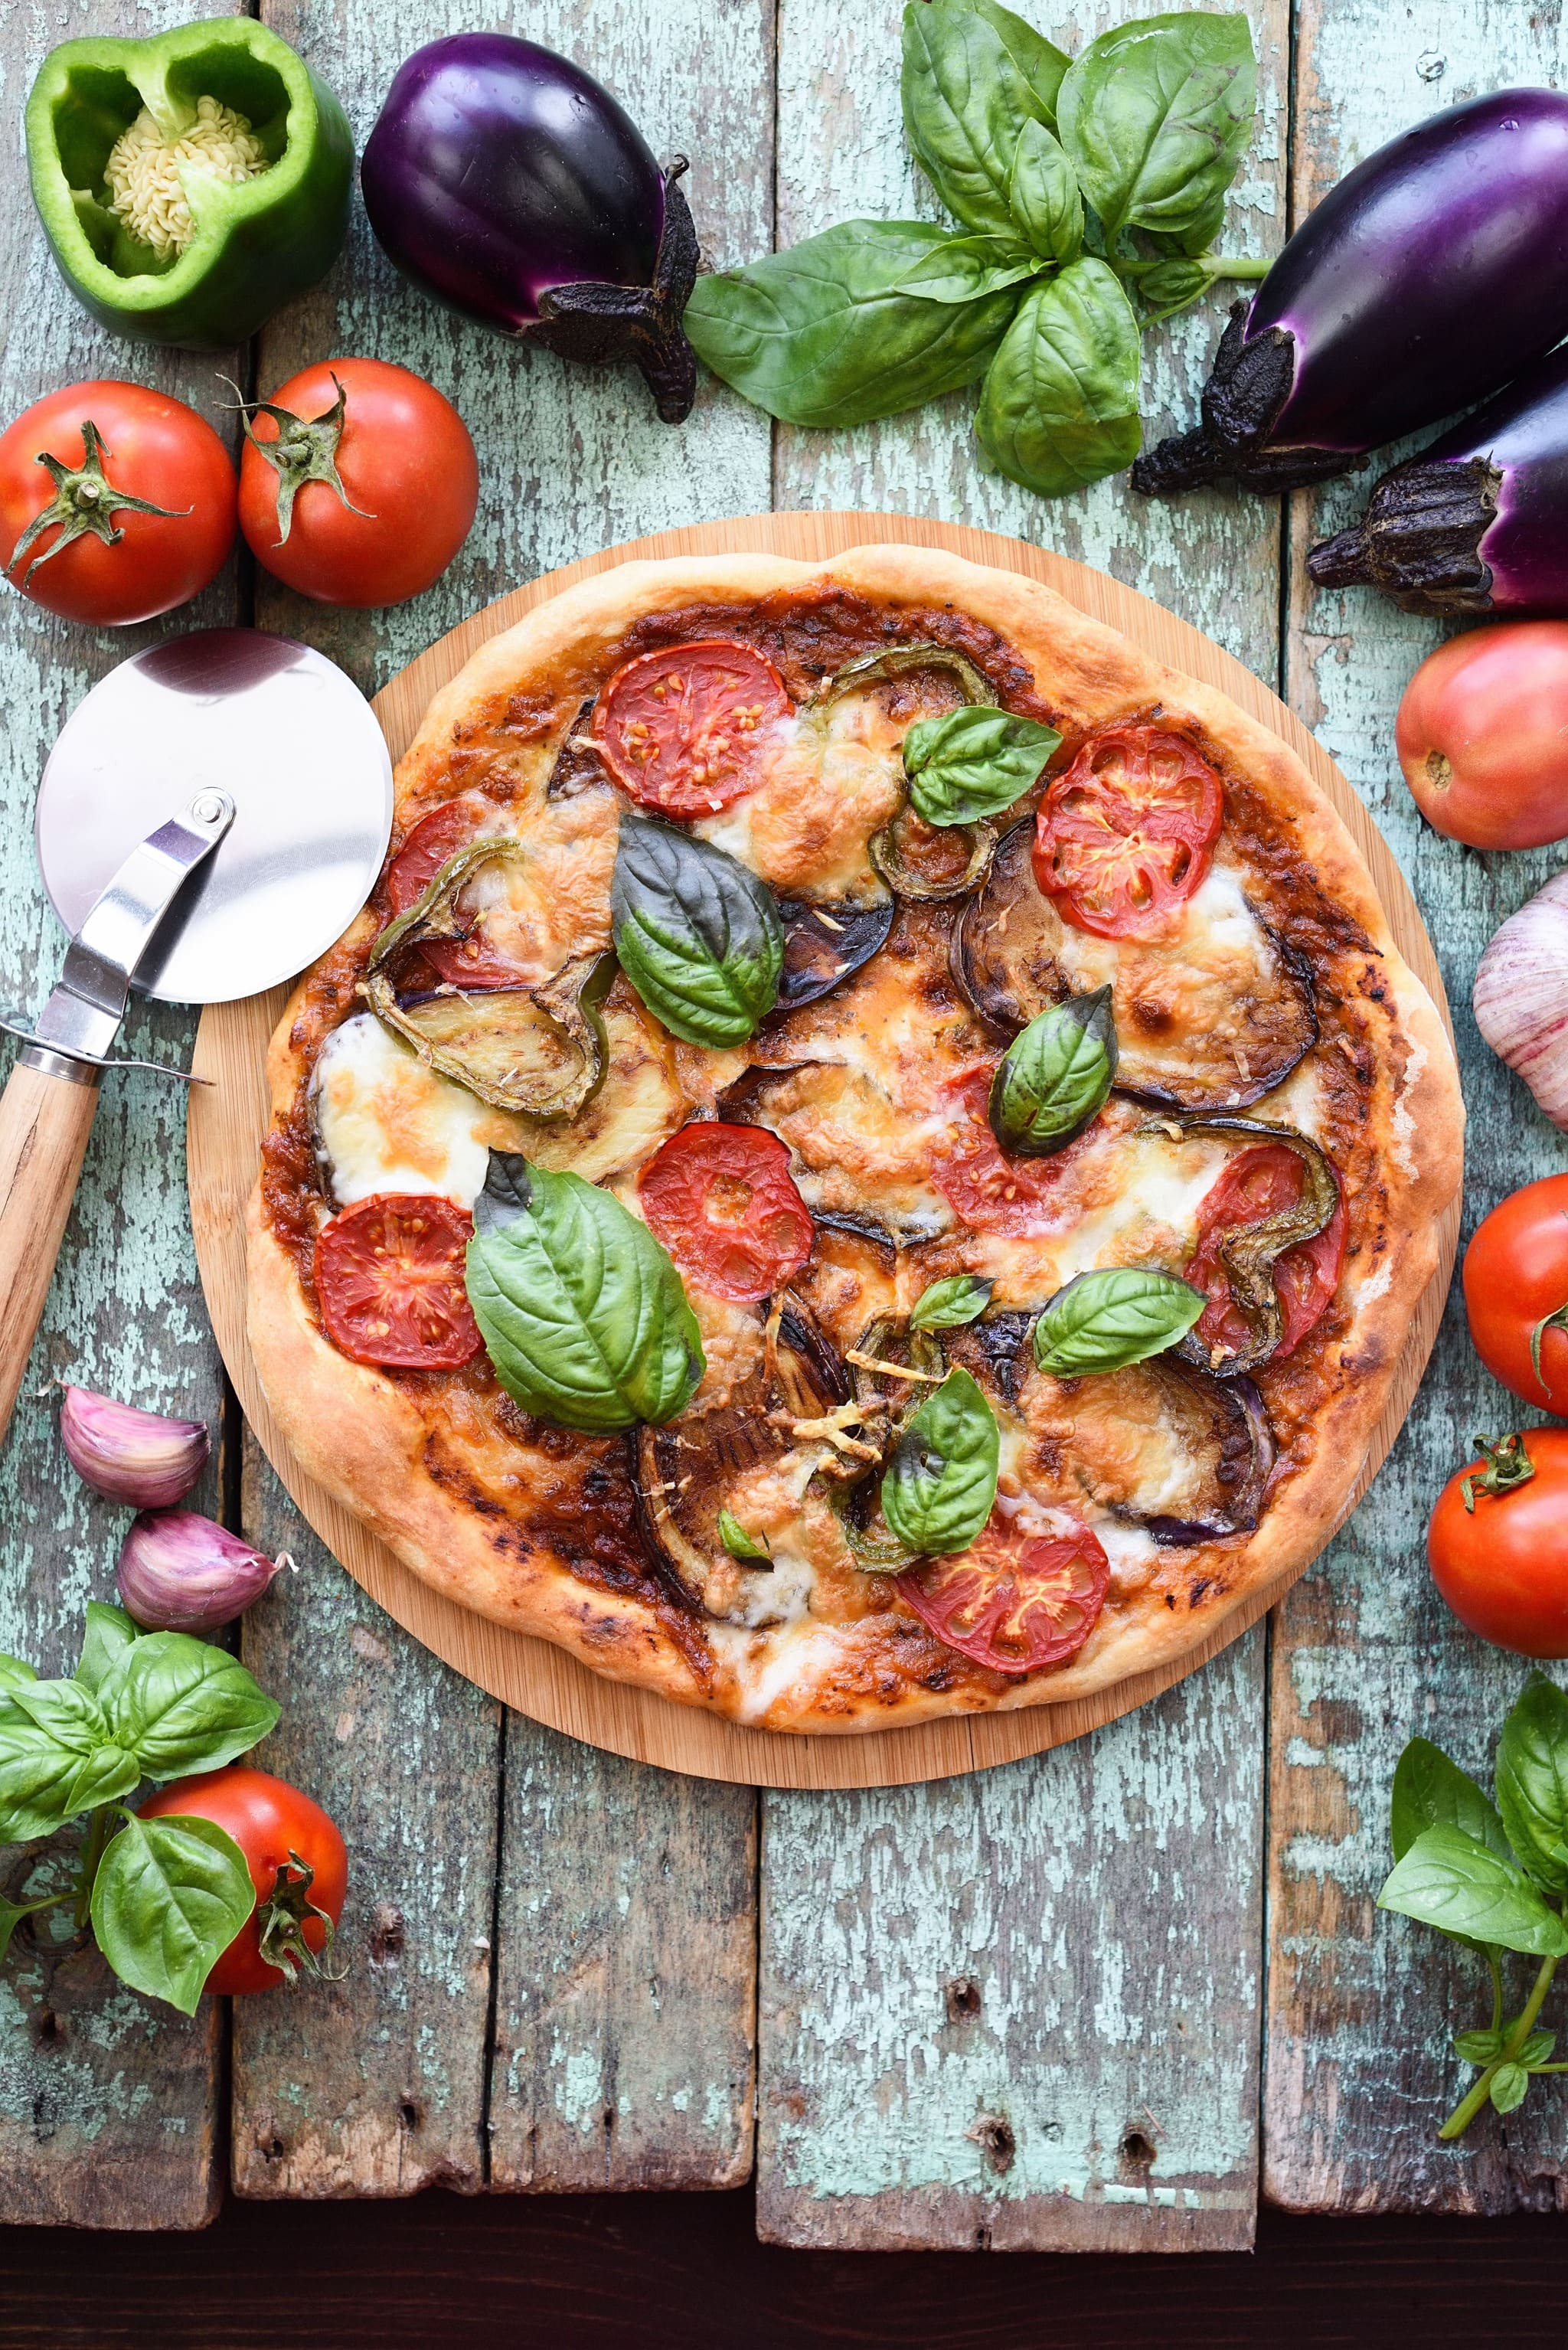 How To Make A Summer Time Pizza Everyone Will Love; Refreshing and